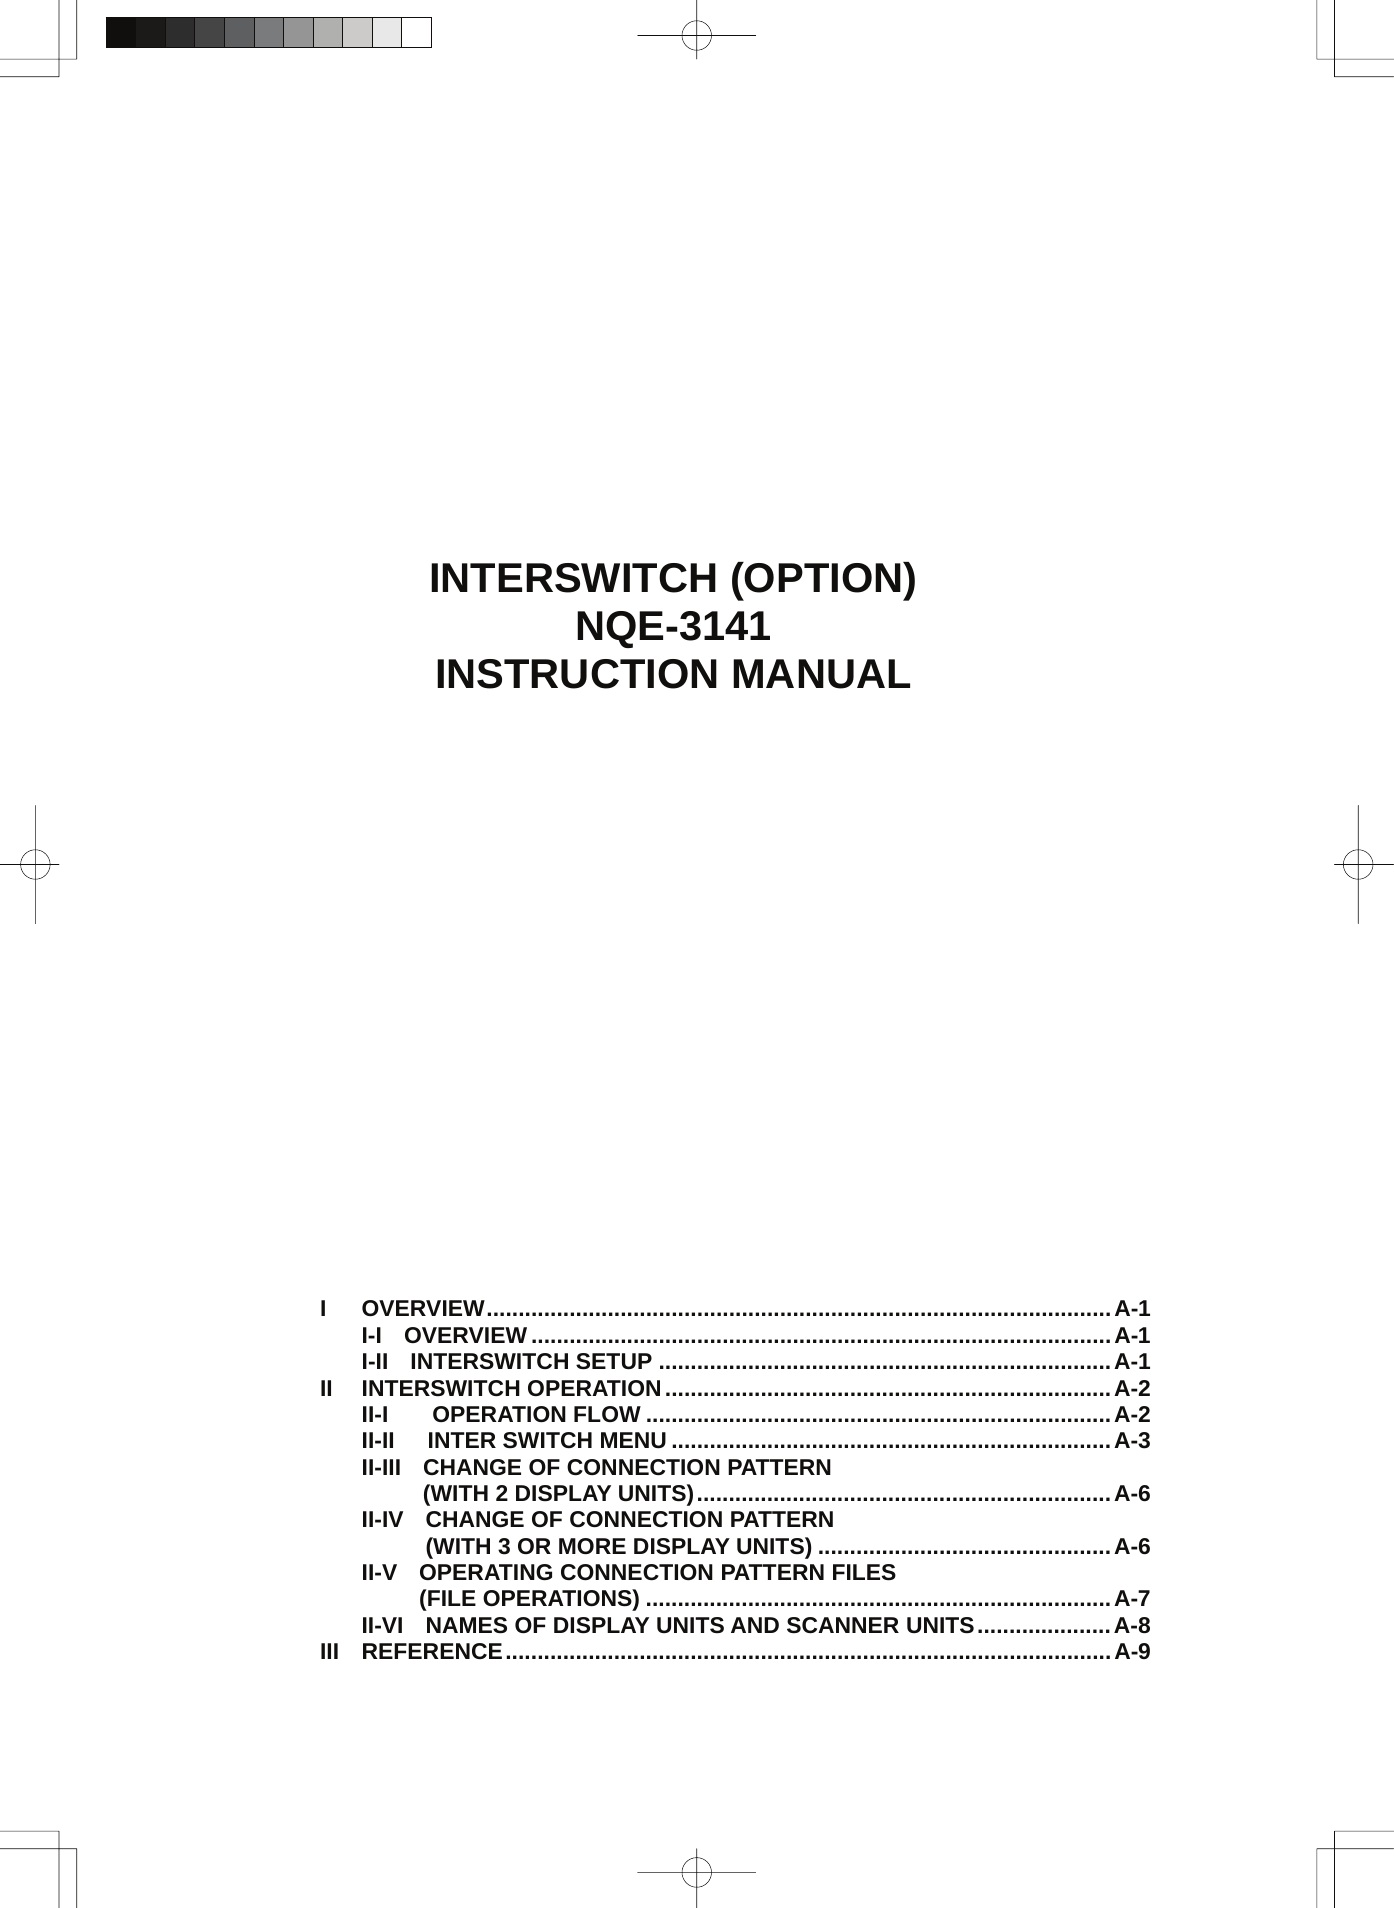              INTERSWITCH (OPTION) NQE-3141 INSTRUCTION MANUAL                          I OVERVIEW..................................................................................................A-1 I-I OVERVIEW ...........................................................................................A-1 I-II INTERSWITCH SETUP .......................................................................A-1 II INTERSWITCH OPERATION......................................................................A-2 II-I   OPERATION FLOW .........................................................................A-2 II-II  INTER SWITCH MENU .....................................................................A-3 II-III CHANGE OF CONNECTION PATTERN     (WITH 2 DISPLAY UNITS).................................................................A-6 II-IV CHANGE OF CONNECTION PATTERN     (WITH 3 OR MORE DISPLAY UNITS) ..............................................A-6 II-V OPERATING CONNECTION PATTERN FILES    (FILE OPERATIONS) .........................................................................A-7 II-VI NAMES OF DISPLAY UNITS AND SCANNER UNITS.....................A-8 III REFERENCE...............................................................................................A-9 